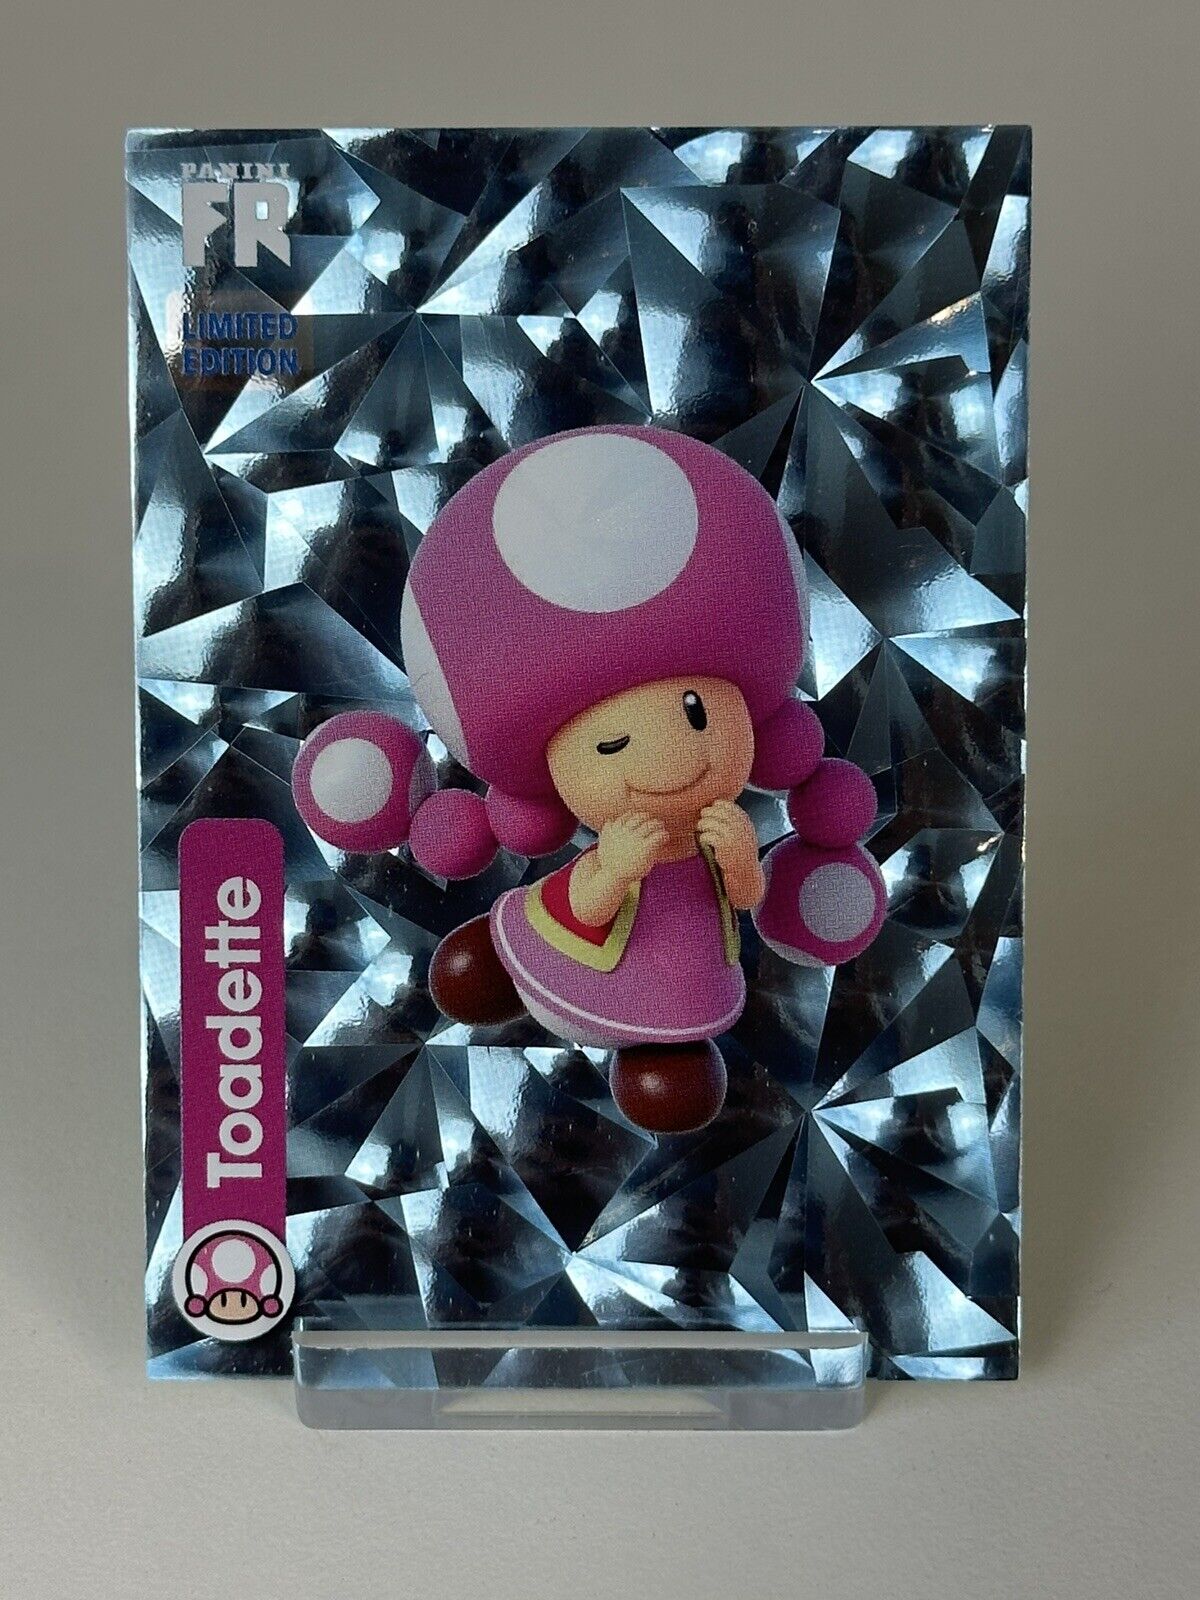 2022 Panini Super Mario Toadette Limited Edition LE8 Fragmented Reality 1